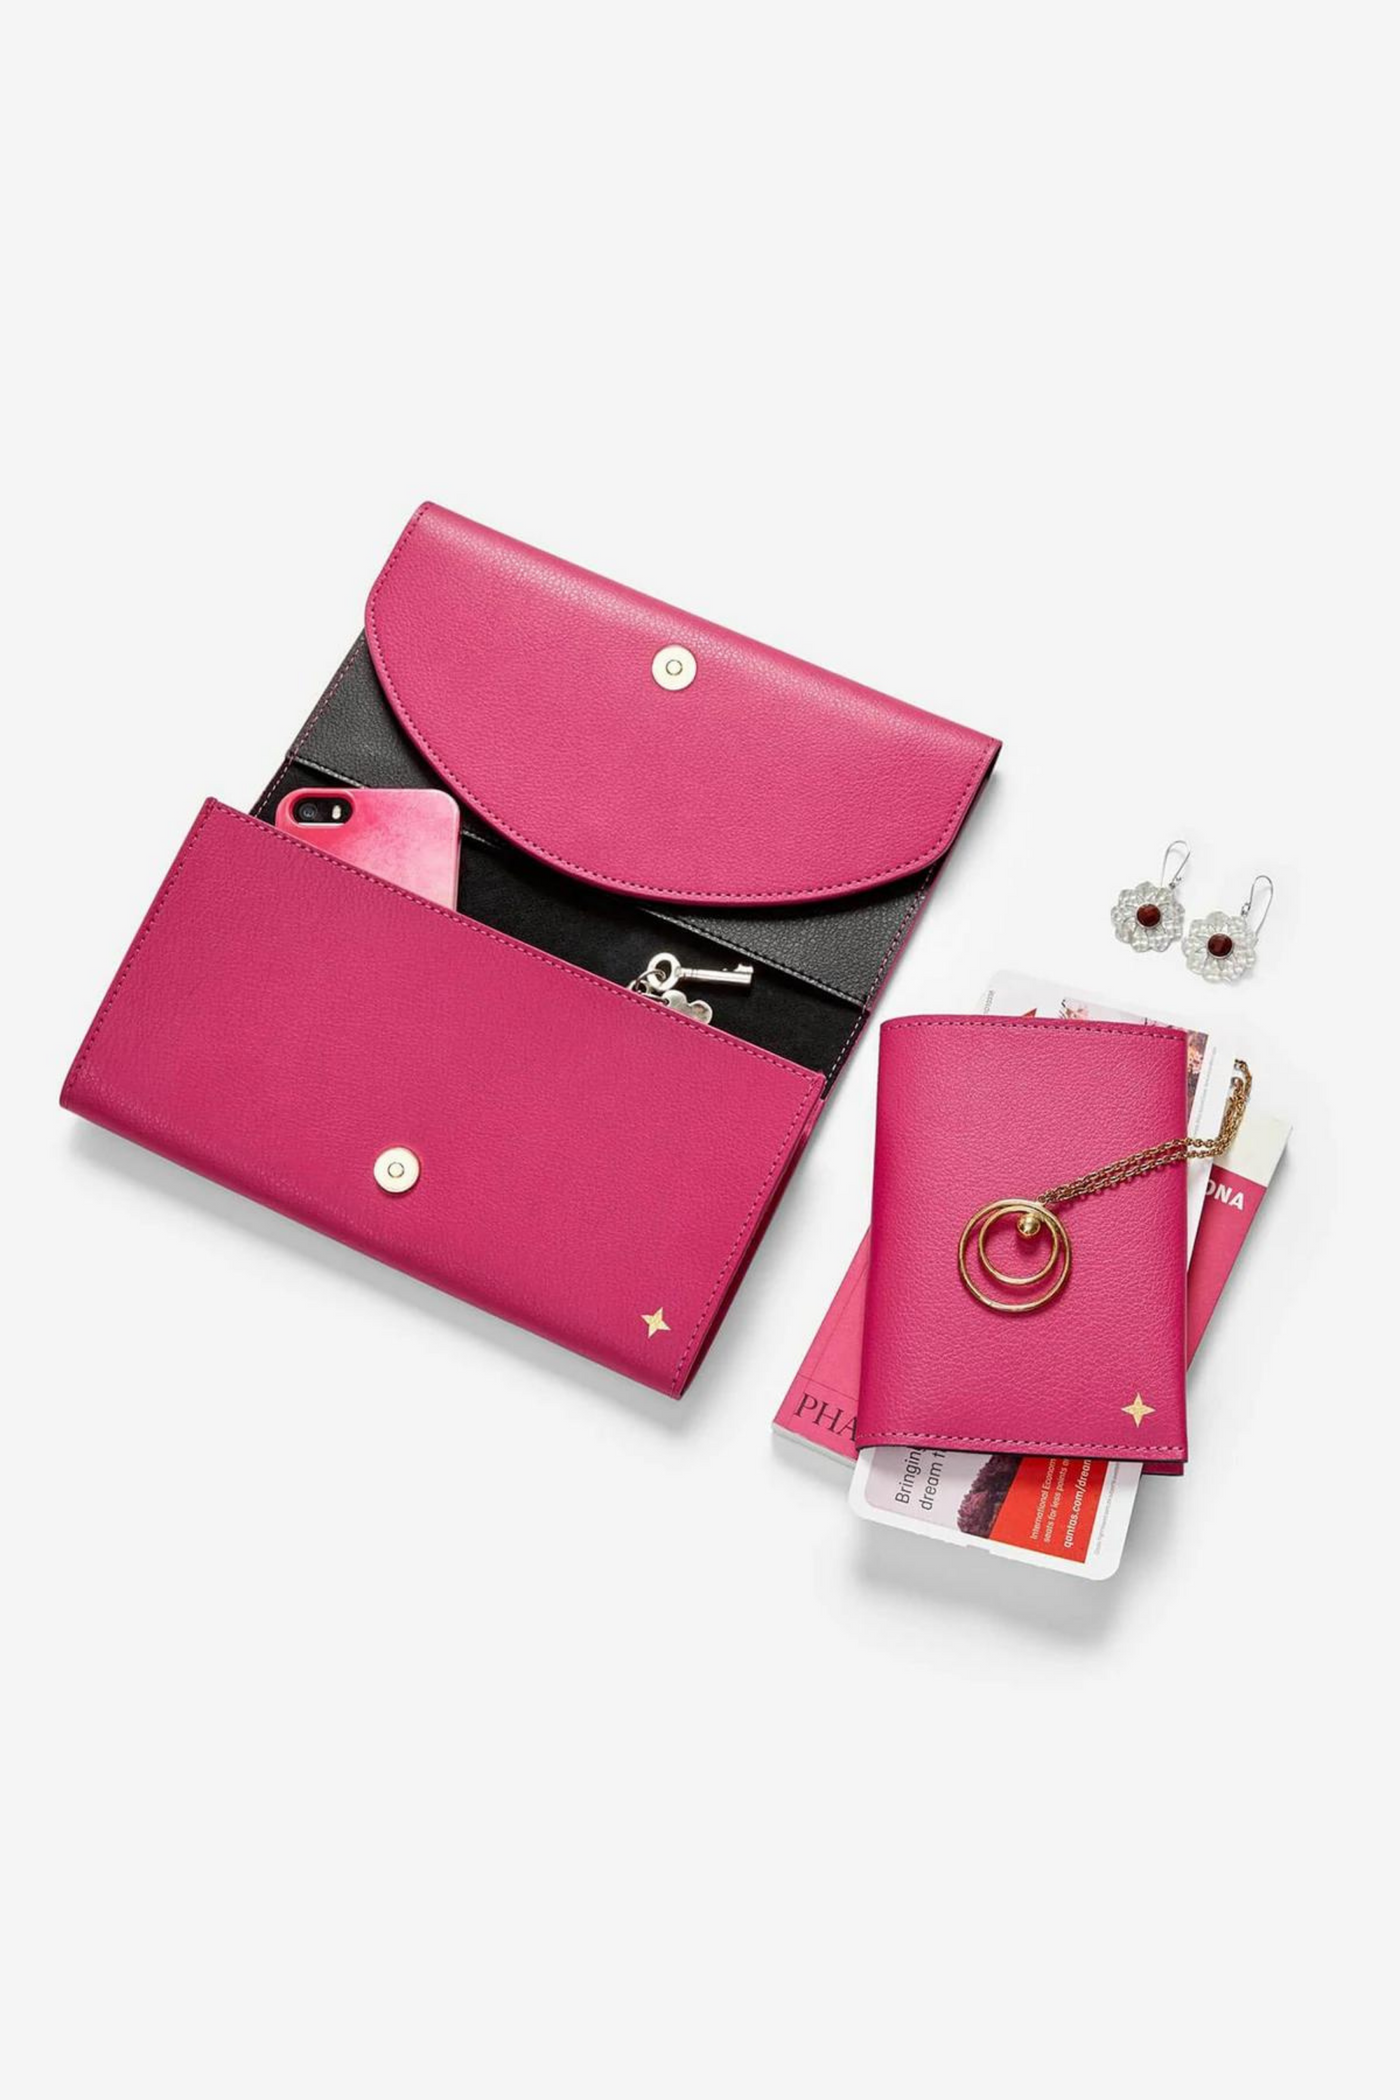 The Elsewhere Co. Travel Wallet Set in Paradise Pink, available on ZERRIN with free Singapore shipping